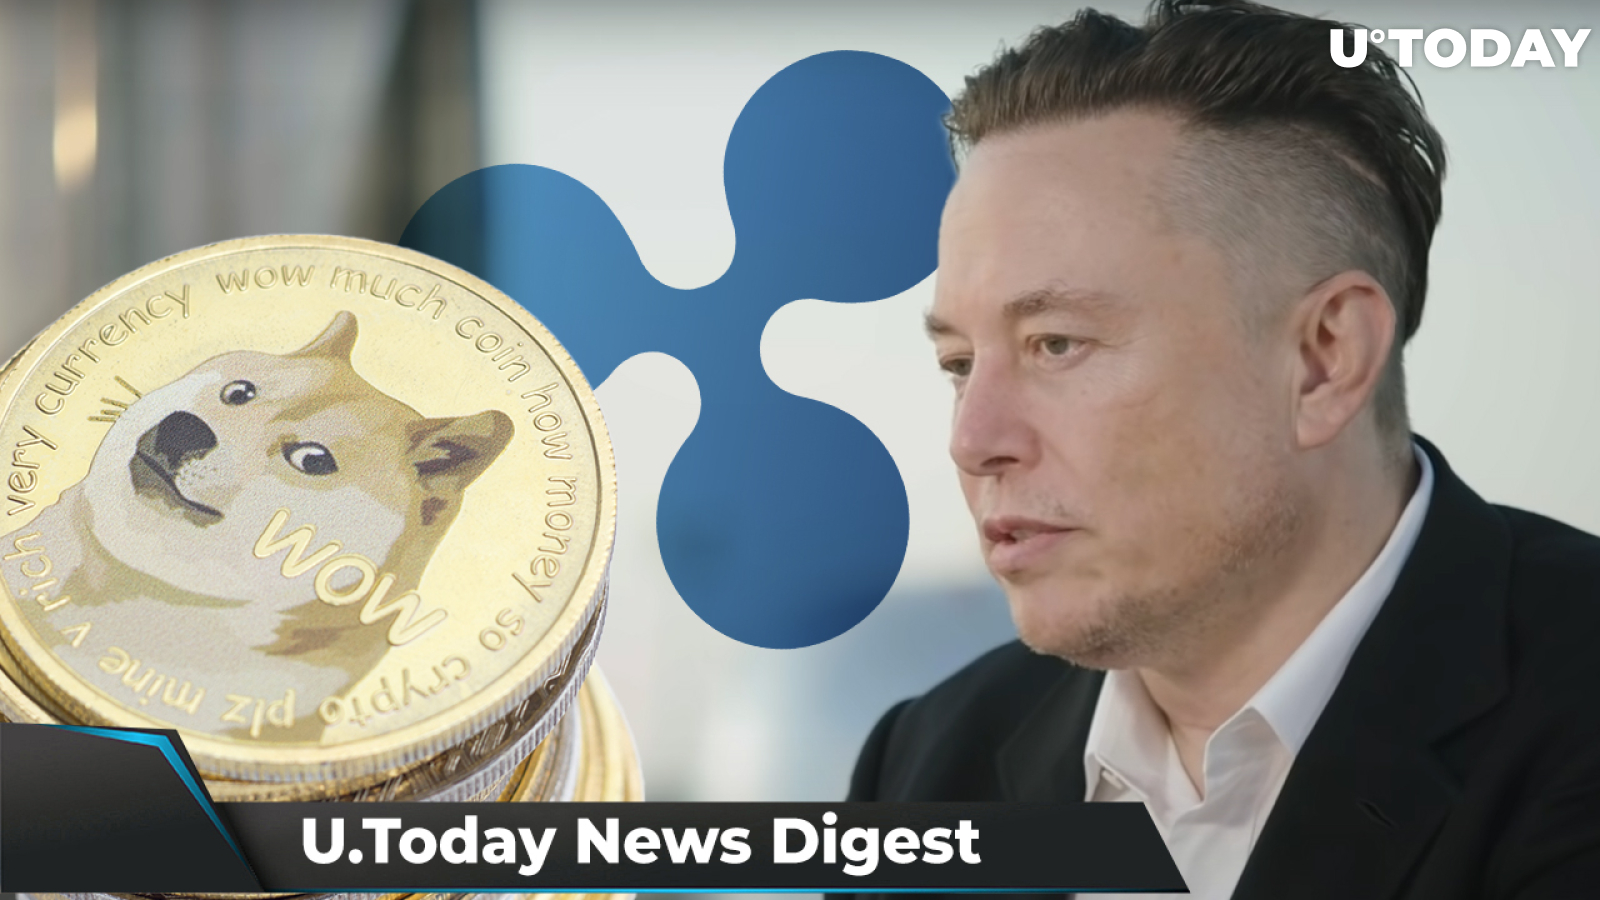 Elon Musk Hints at DOGE Army Being “Too Active,” Ripple Seeks to Collaborate with Congress: Crypto News Digest by U.Today